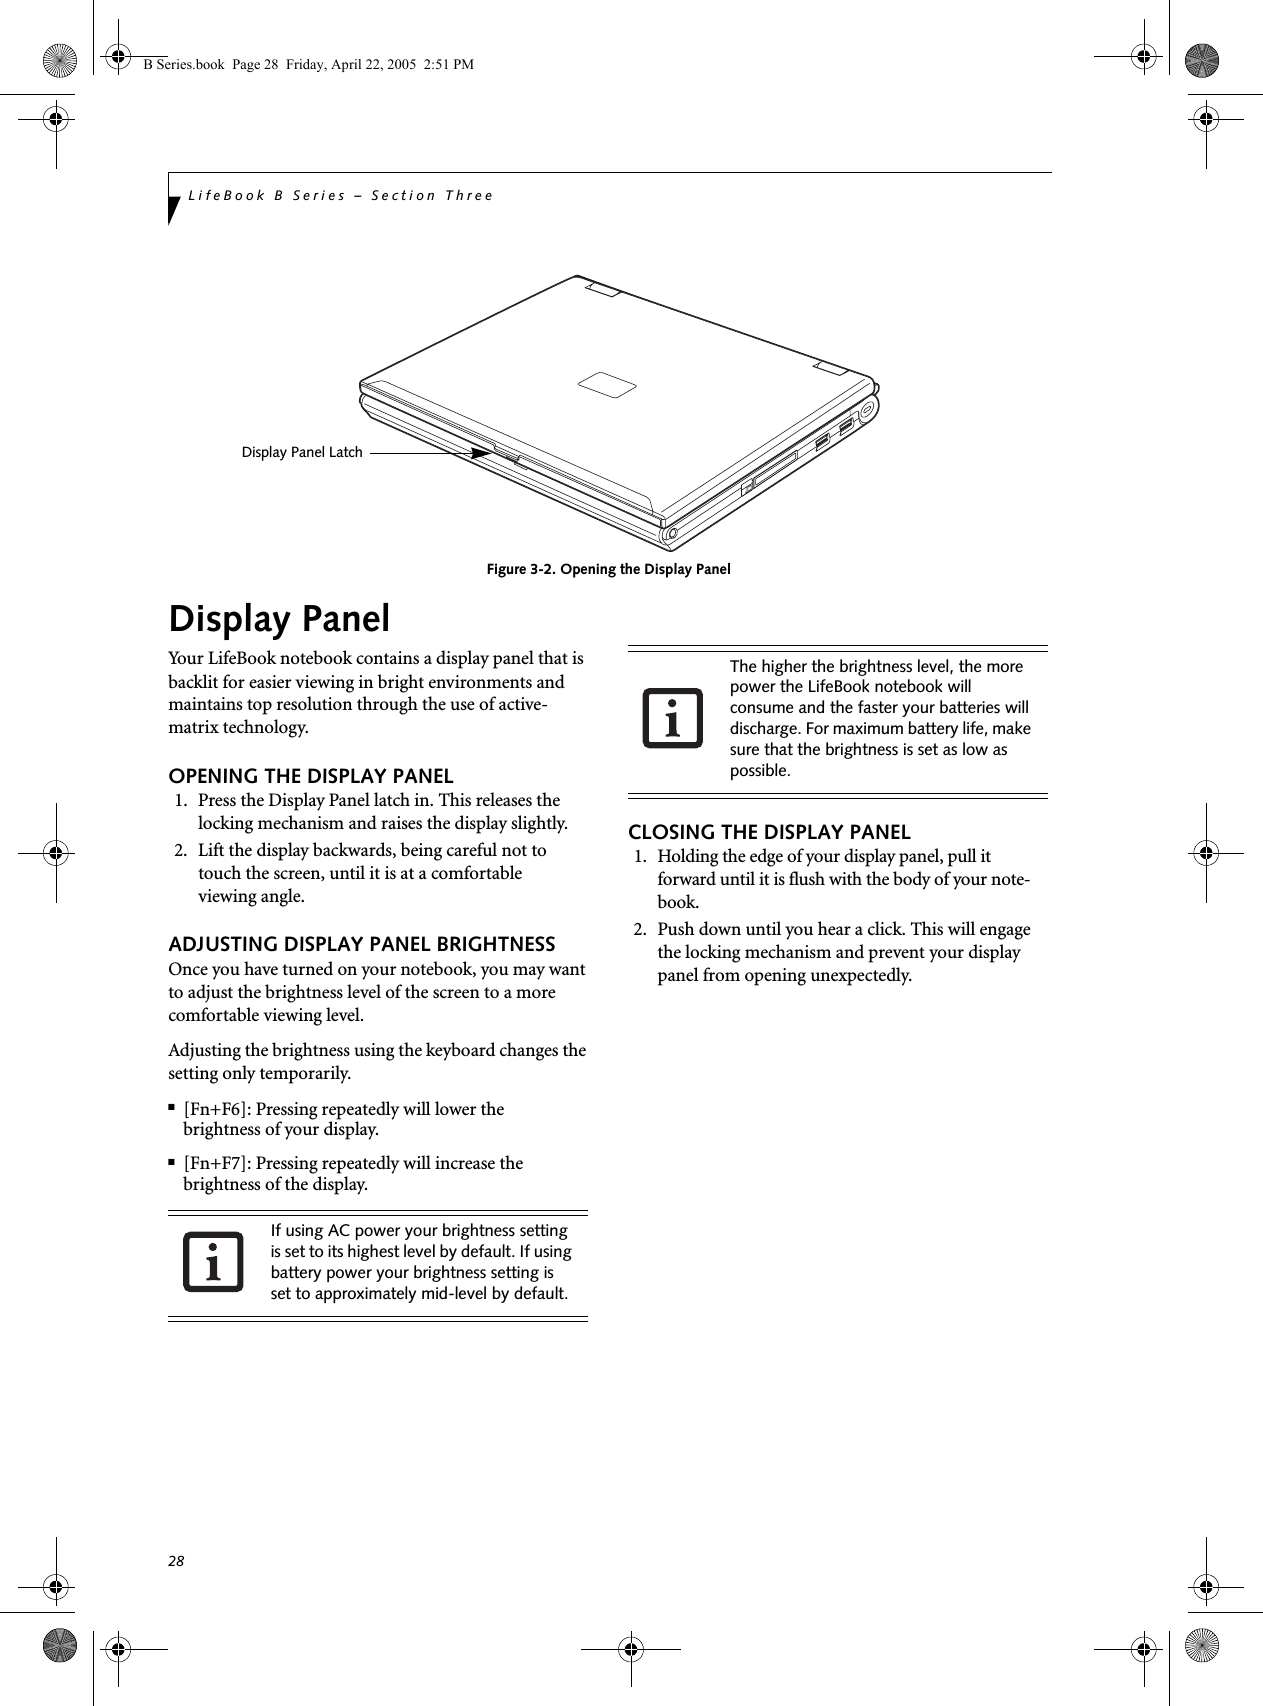 28LifeBook B Series – Section ThreeFigure 3-2. Opening the Display PanelDisplay PanelYour LifeBook notebook contains a display panel that is backlit for easier viewing in bright environments and maintains top resolution through the use of active-matrix technology. OPENING THE DISPLAY PANEL1. Press the Display Panel latch in. This releases the locking mechanism and raises the display slightly. 2. Lift the display backwards, being careful not to touch the screen, until it is at a comfortableviewing angle. ADJUSTING DISPLAY PANEL BRIGHTNESSOnce you have turned on your notebook, you may want to adjust the brightness level of the screen to a more comfortable viewing level. Adjusting the brightness using the keyboard changes the setting only temporarily. ■[Fn+F6]: Pressing repeatedly will lower thebrightness of your display.■[Fn+F7]: Pressing repeatedly will increase thebrightness of the display.CLOSING THE DISPLAY PANEL1. Holding the edge of your display panel, pull it forward until it is flush with the body of your note-book. 2. Push down until you hear a click. This will engage the locking mechanism and prevent your display panel from opening unexpectedly.Display Panel LatchIf using AC power your brightness setting is set to its highest level by default. If using battery power your brightness setting is set to approximately mid-level by default.The higher the brightness level, the more power the LifeBook notebook will consume and the faster your batteries will discharge. For maximum battery life, make sure that the brightness is set as low as possible.B Series.book  Page 28  Friday, April 22, 2005  2:51 PM